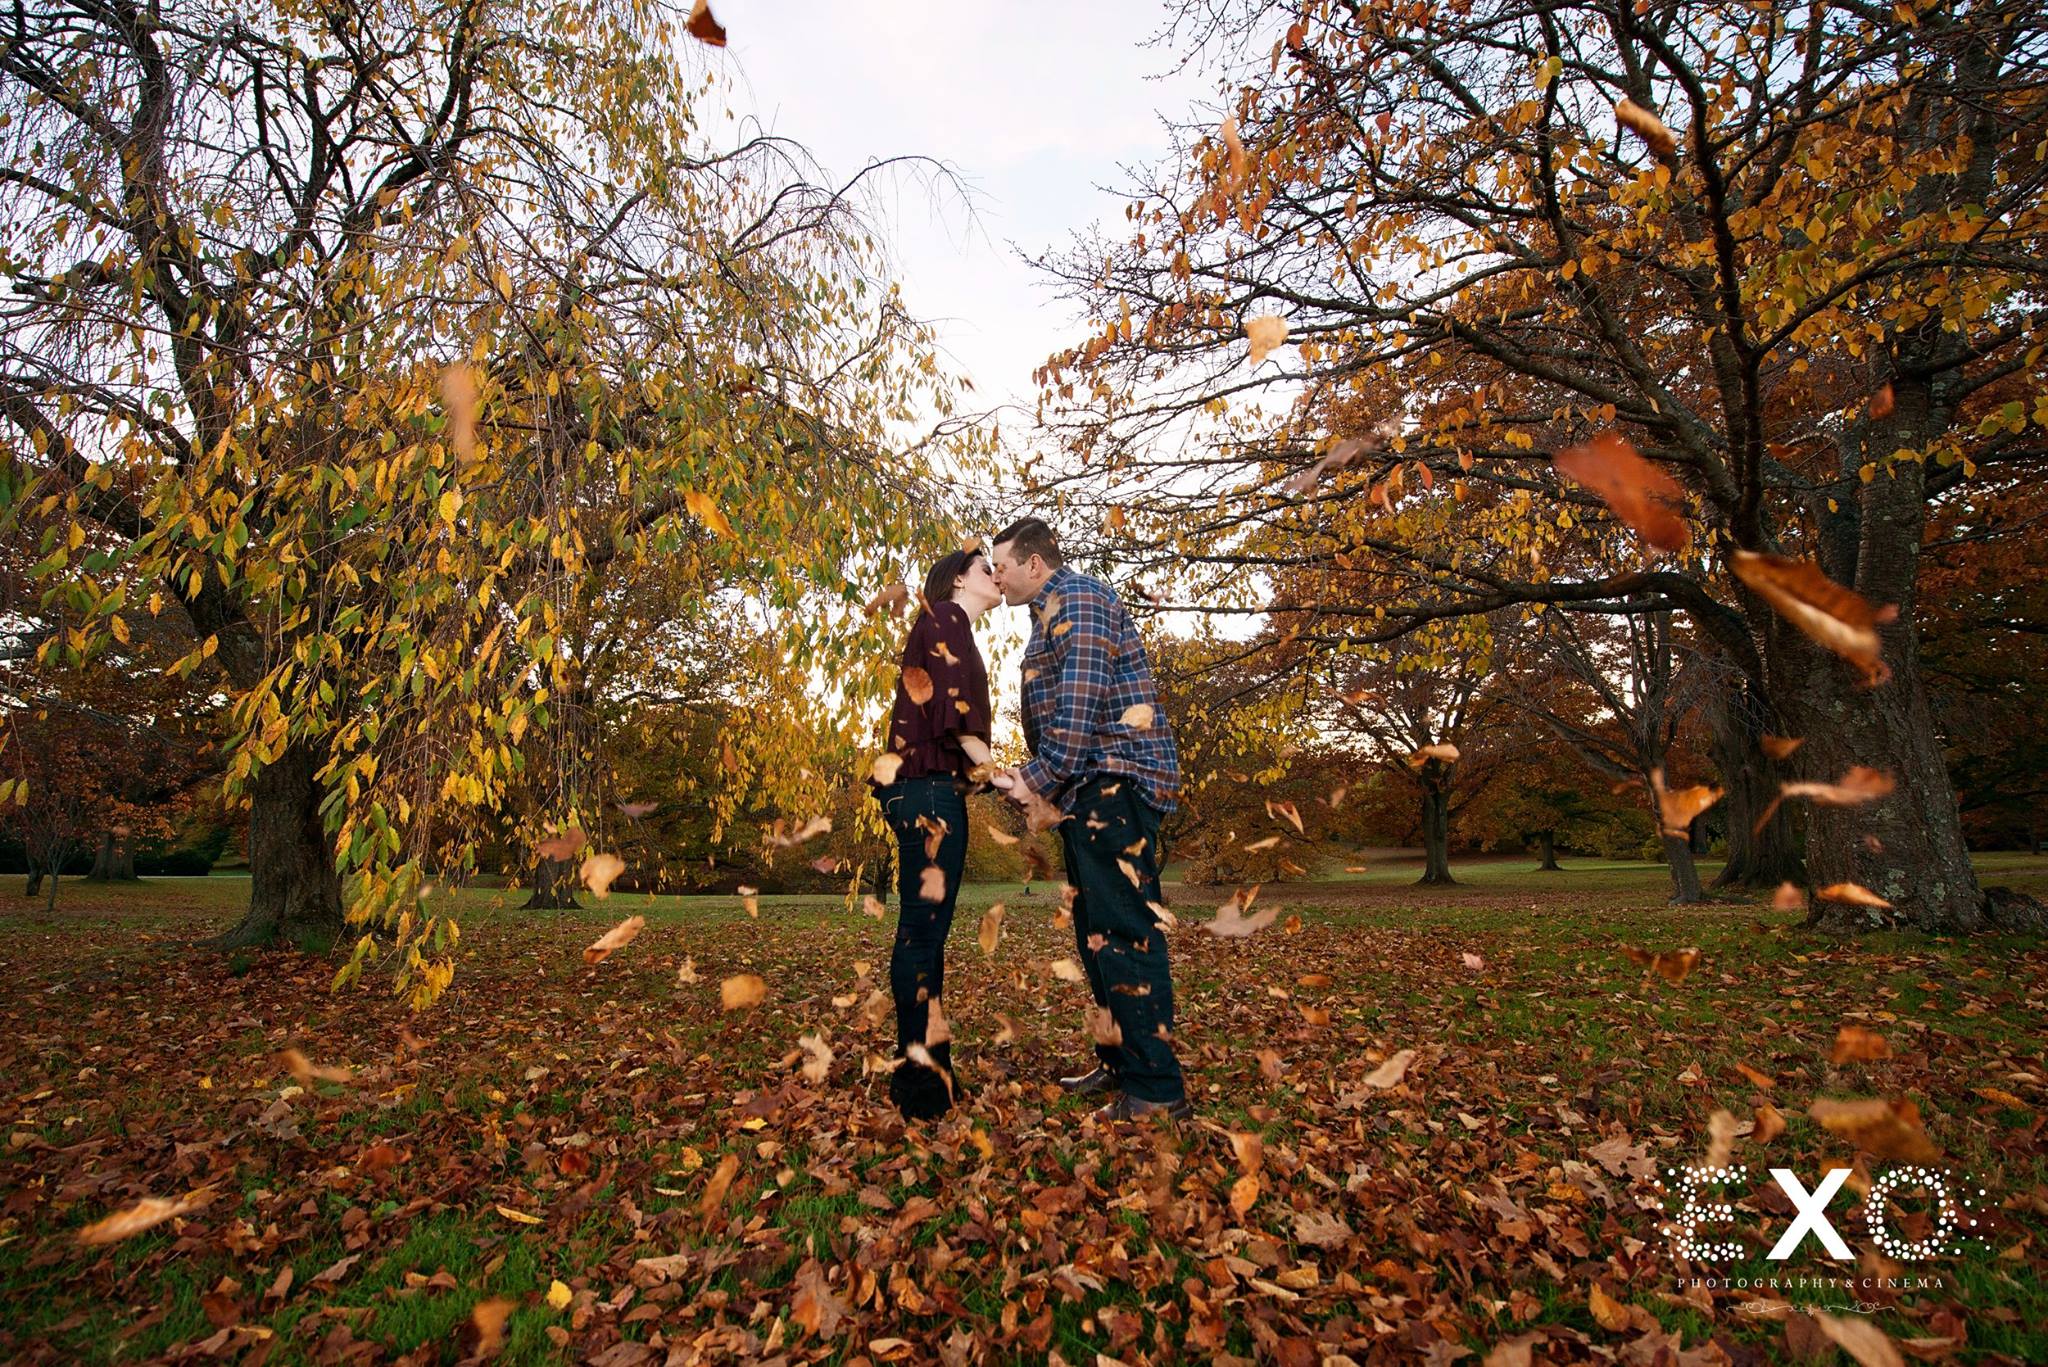 jessica and jason kissing with leaves flying in the air